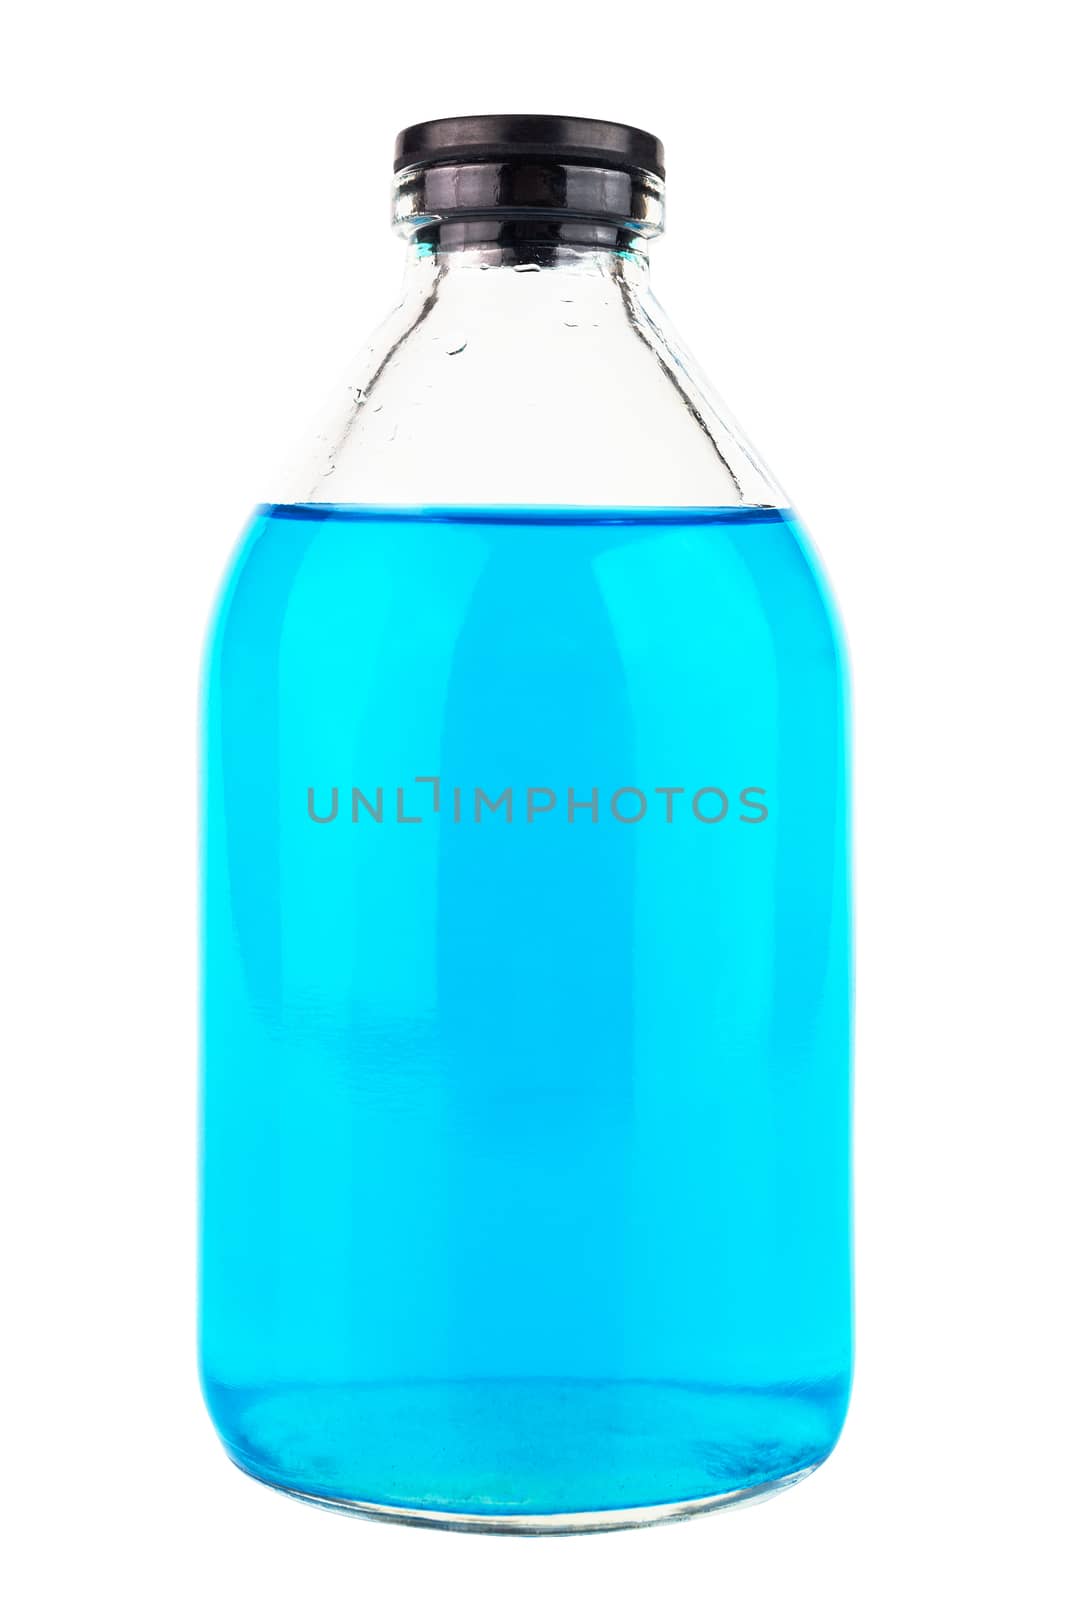 closed old style glass medical or chemical bottle with blue transparent liquid isolated on white background by z1b